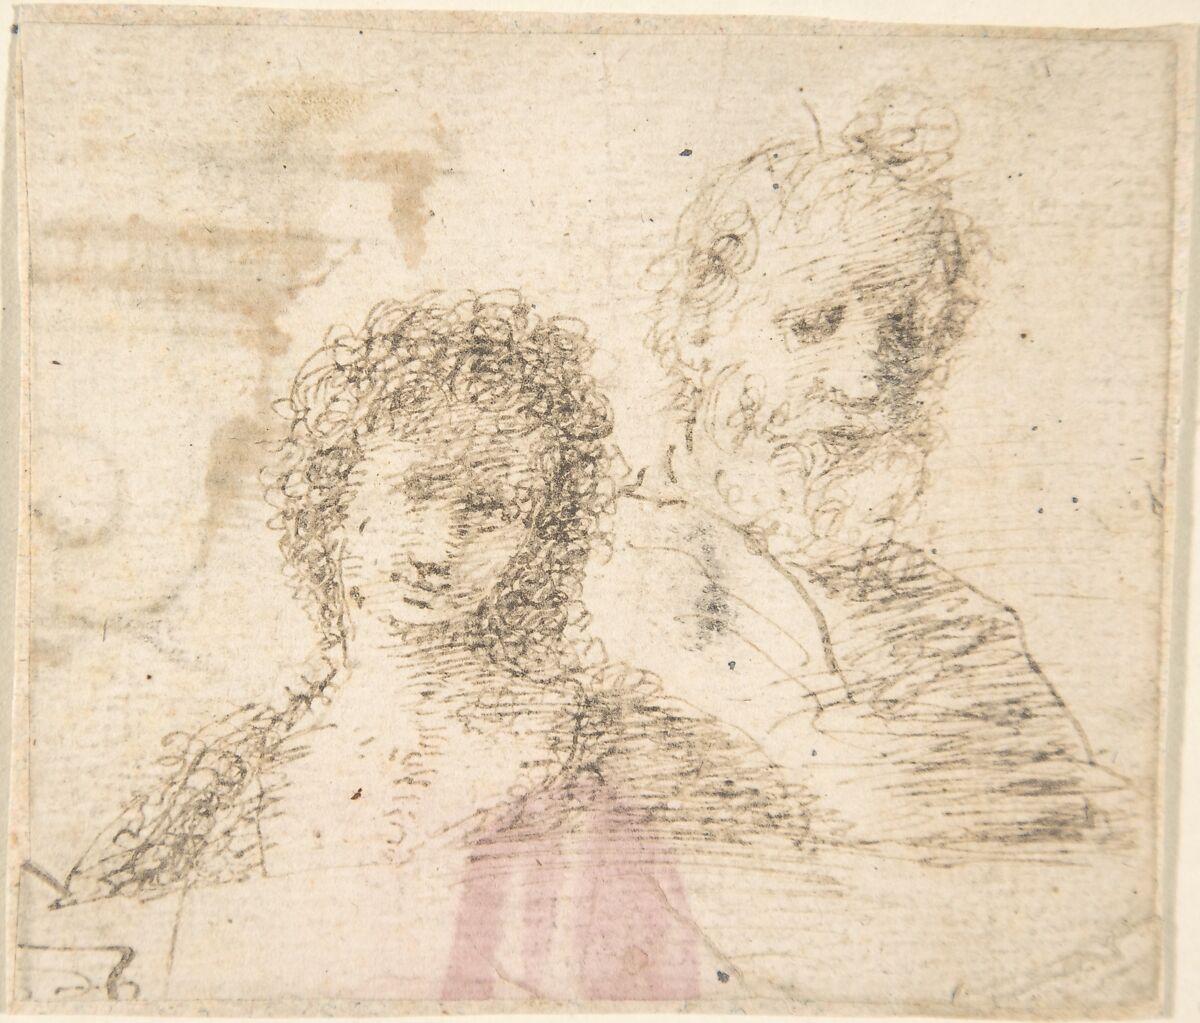 Busts of a Young Woman and an Old Bearded Man, Anonymous, Spanish, School of Seville, 17th century, Pen and dark brown ink. On off-white paper 